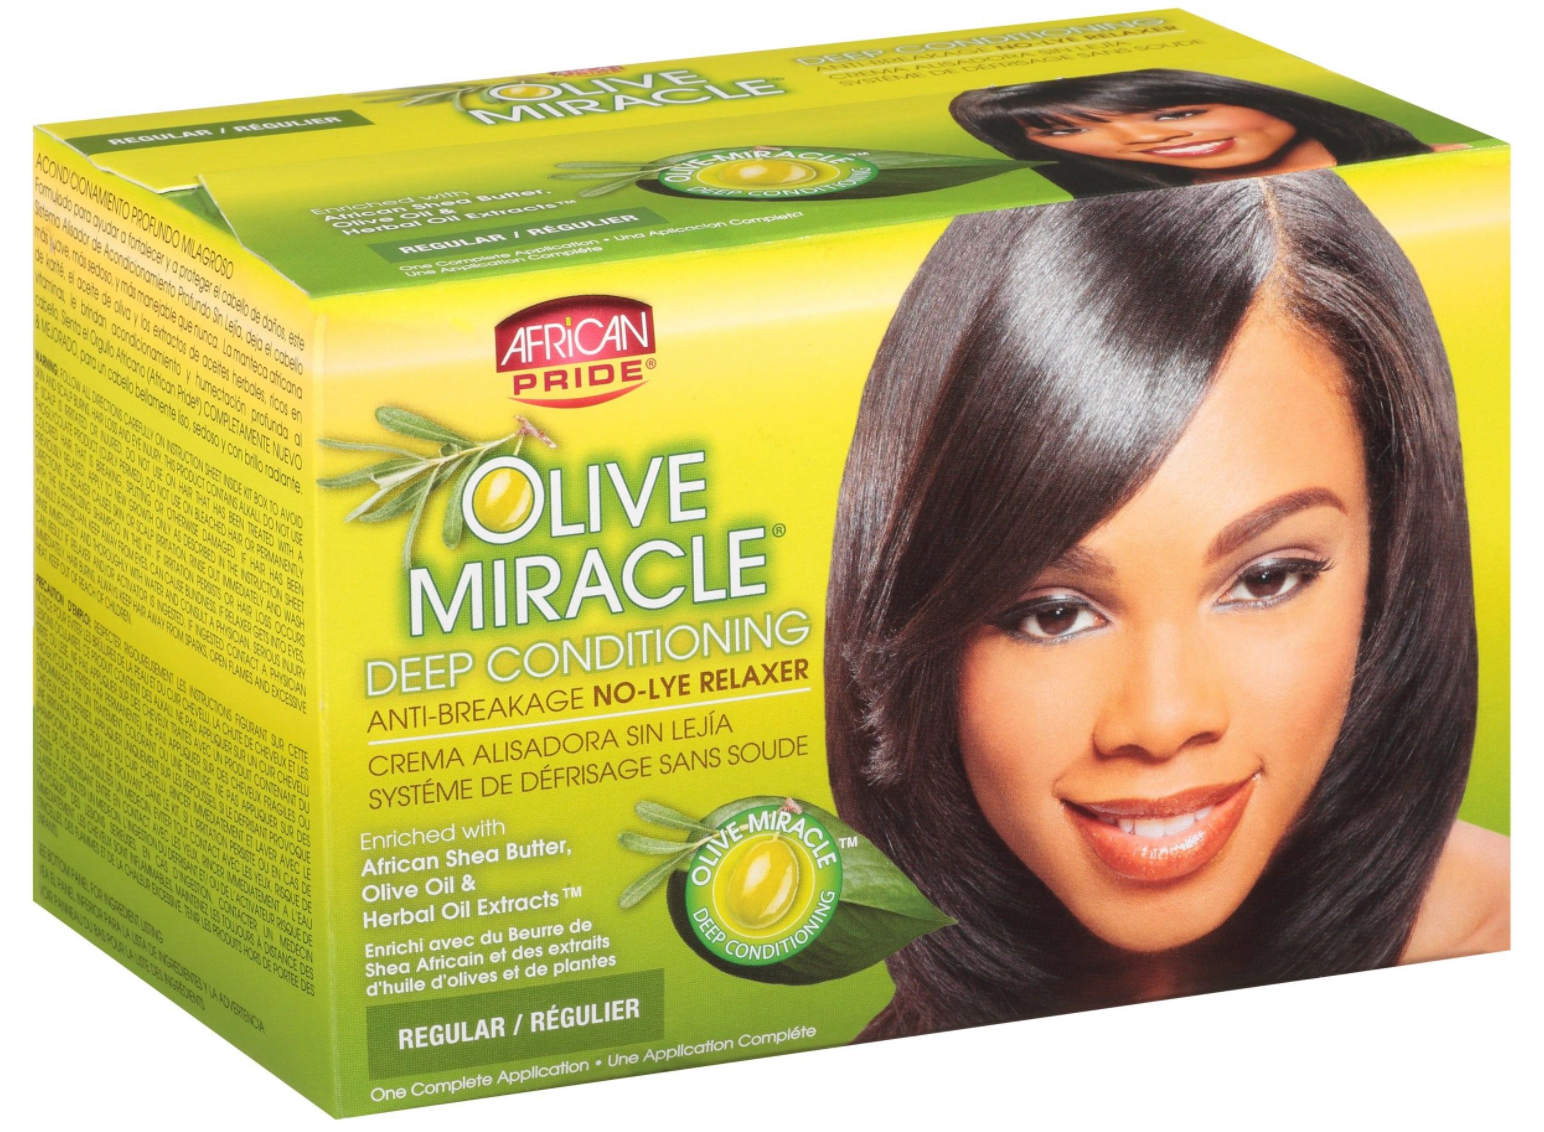 African Pride - Miracle Deep Conditioning No-Lye Relexer System Regular